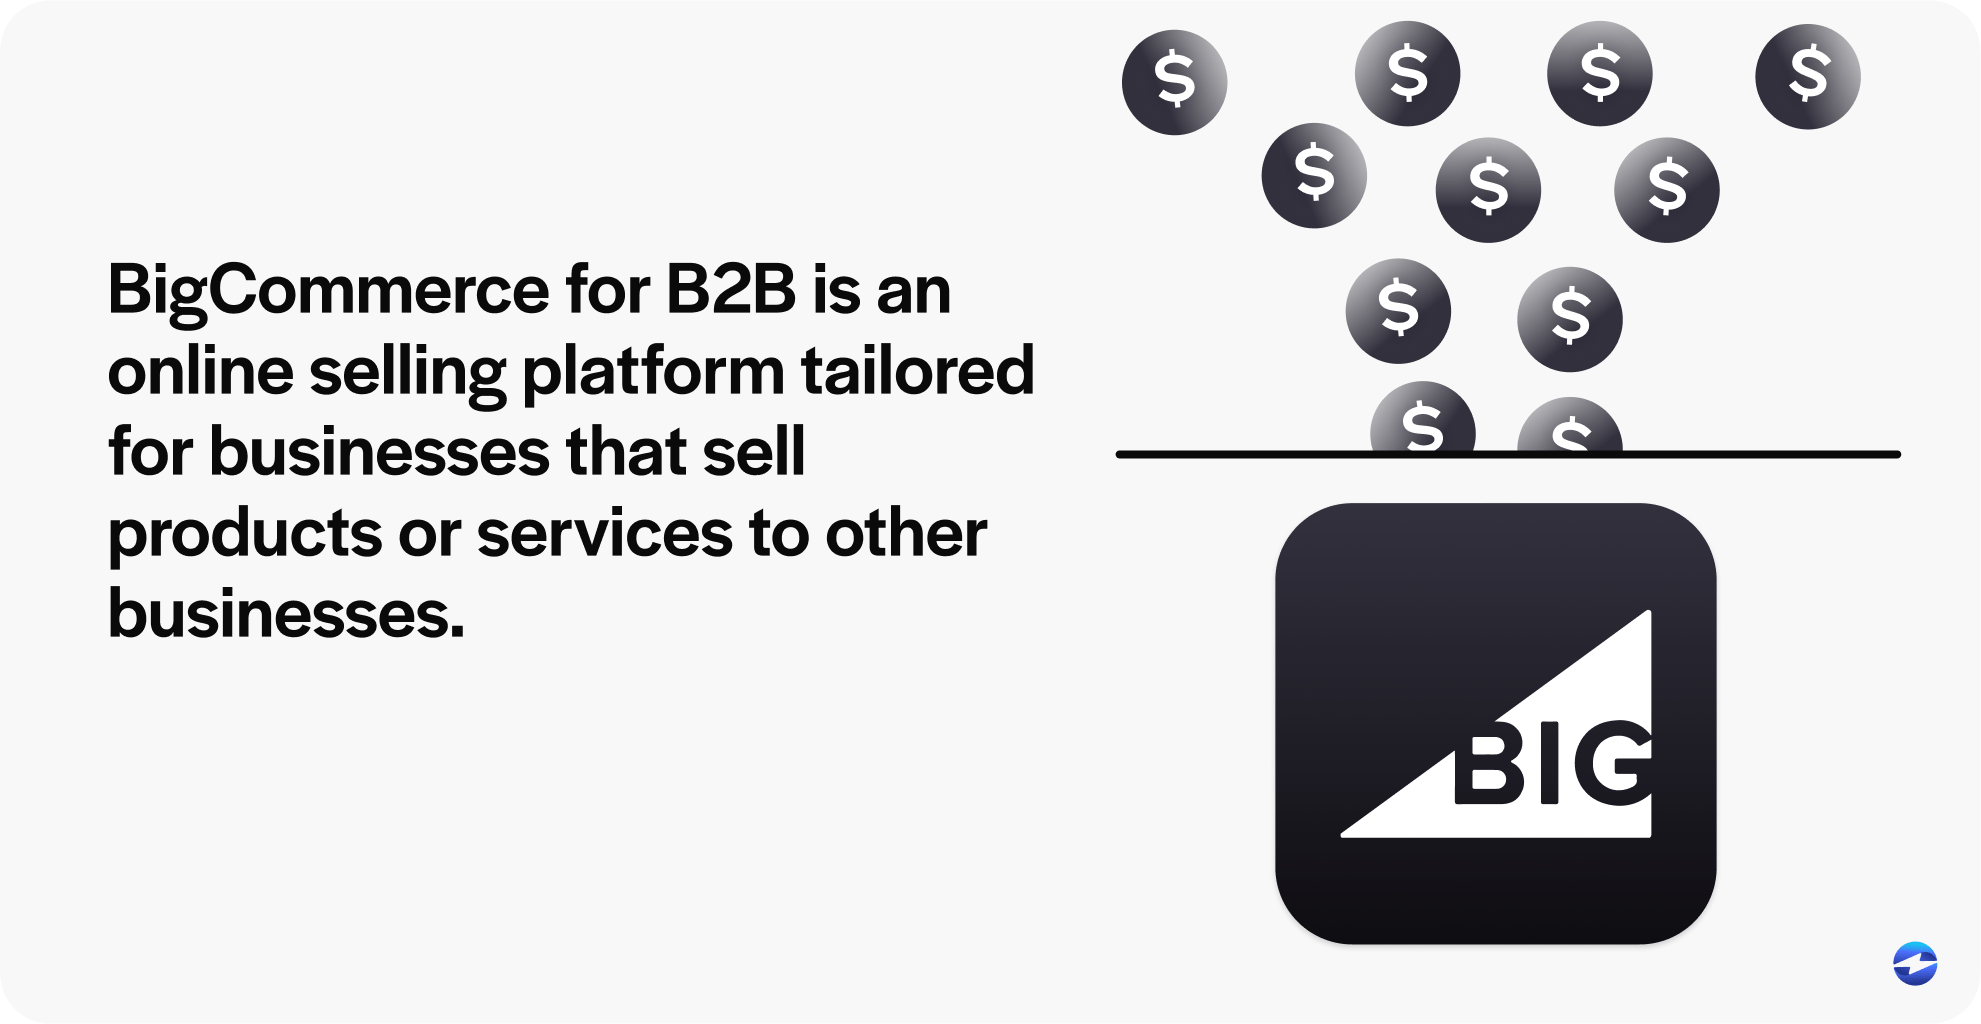 What is BigCommerce for B2B?